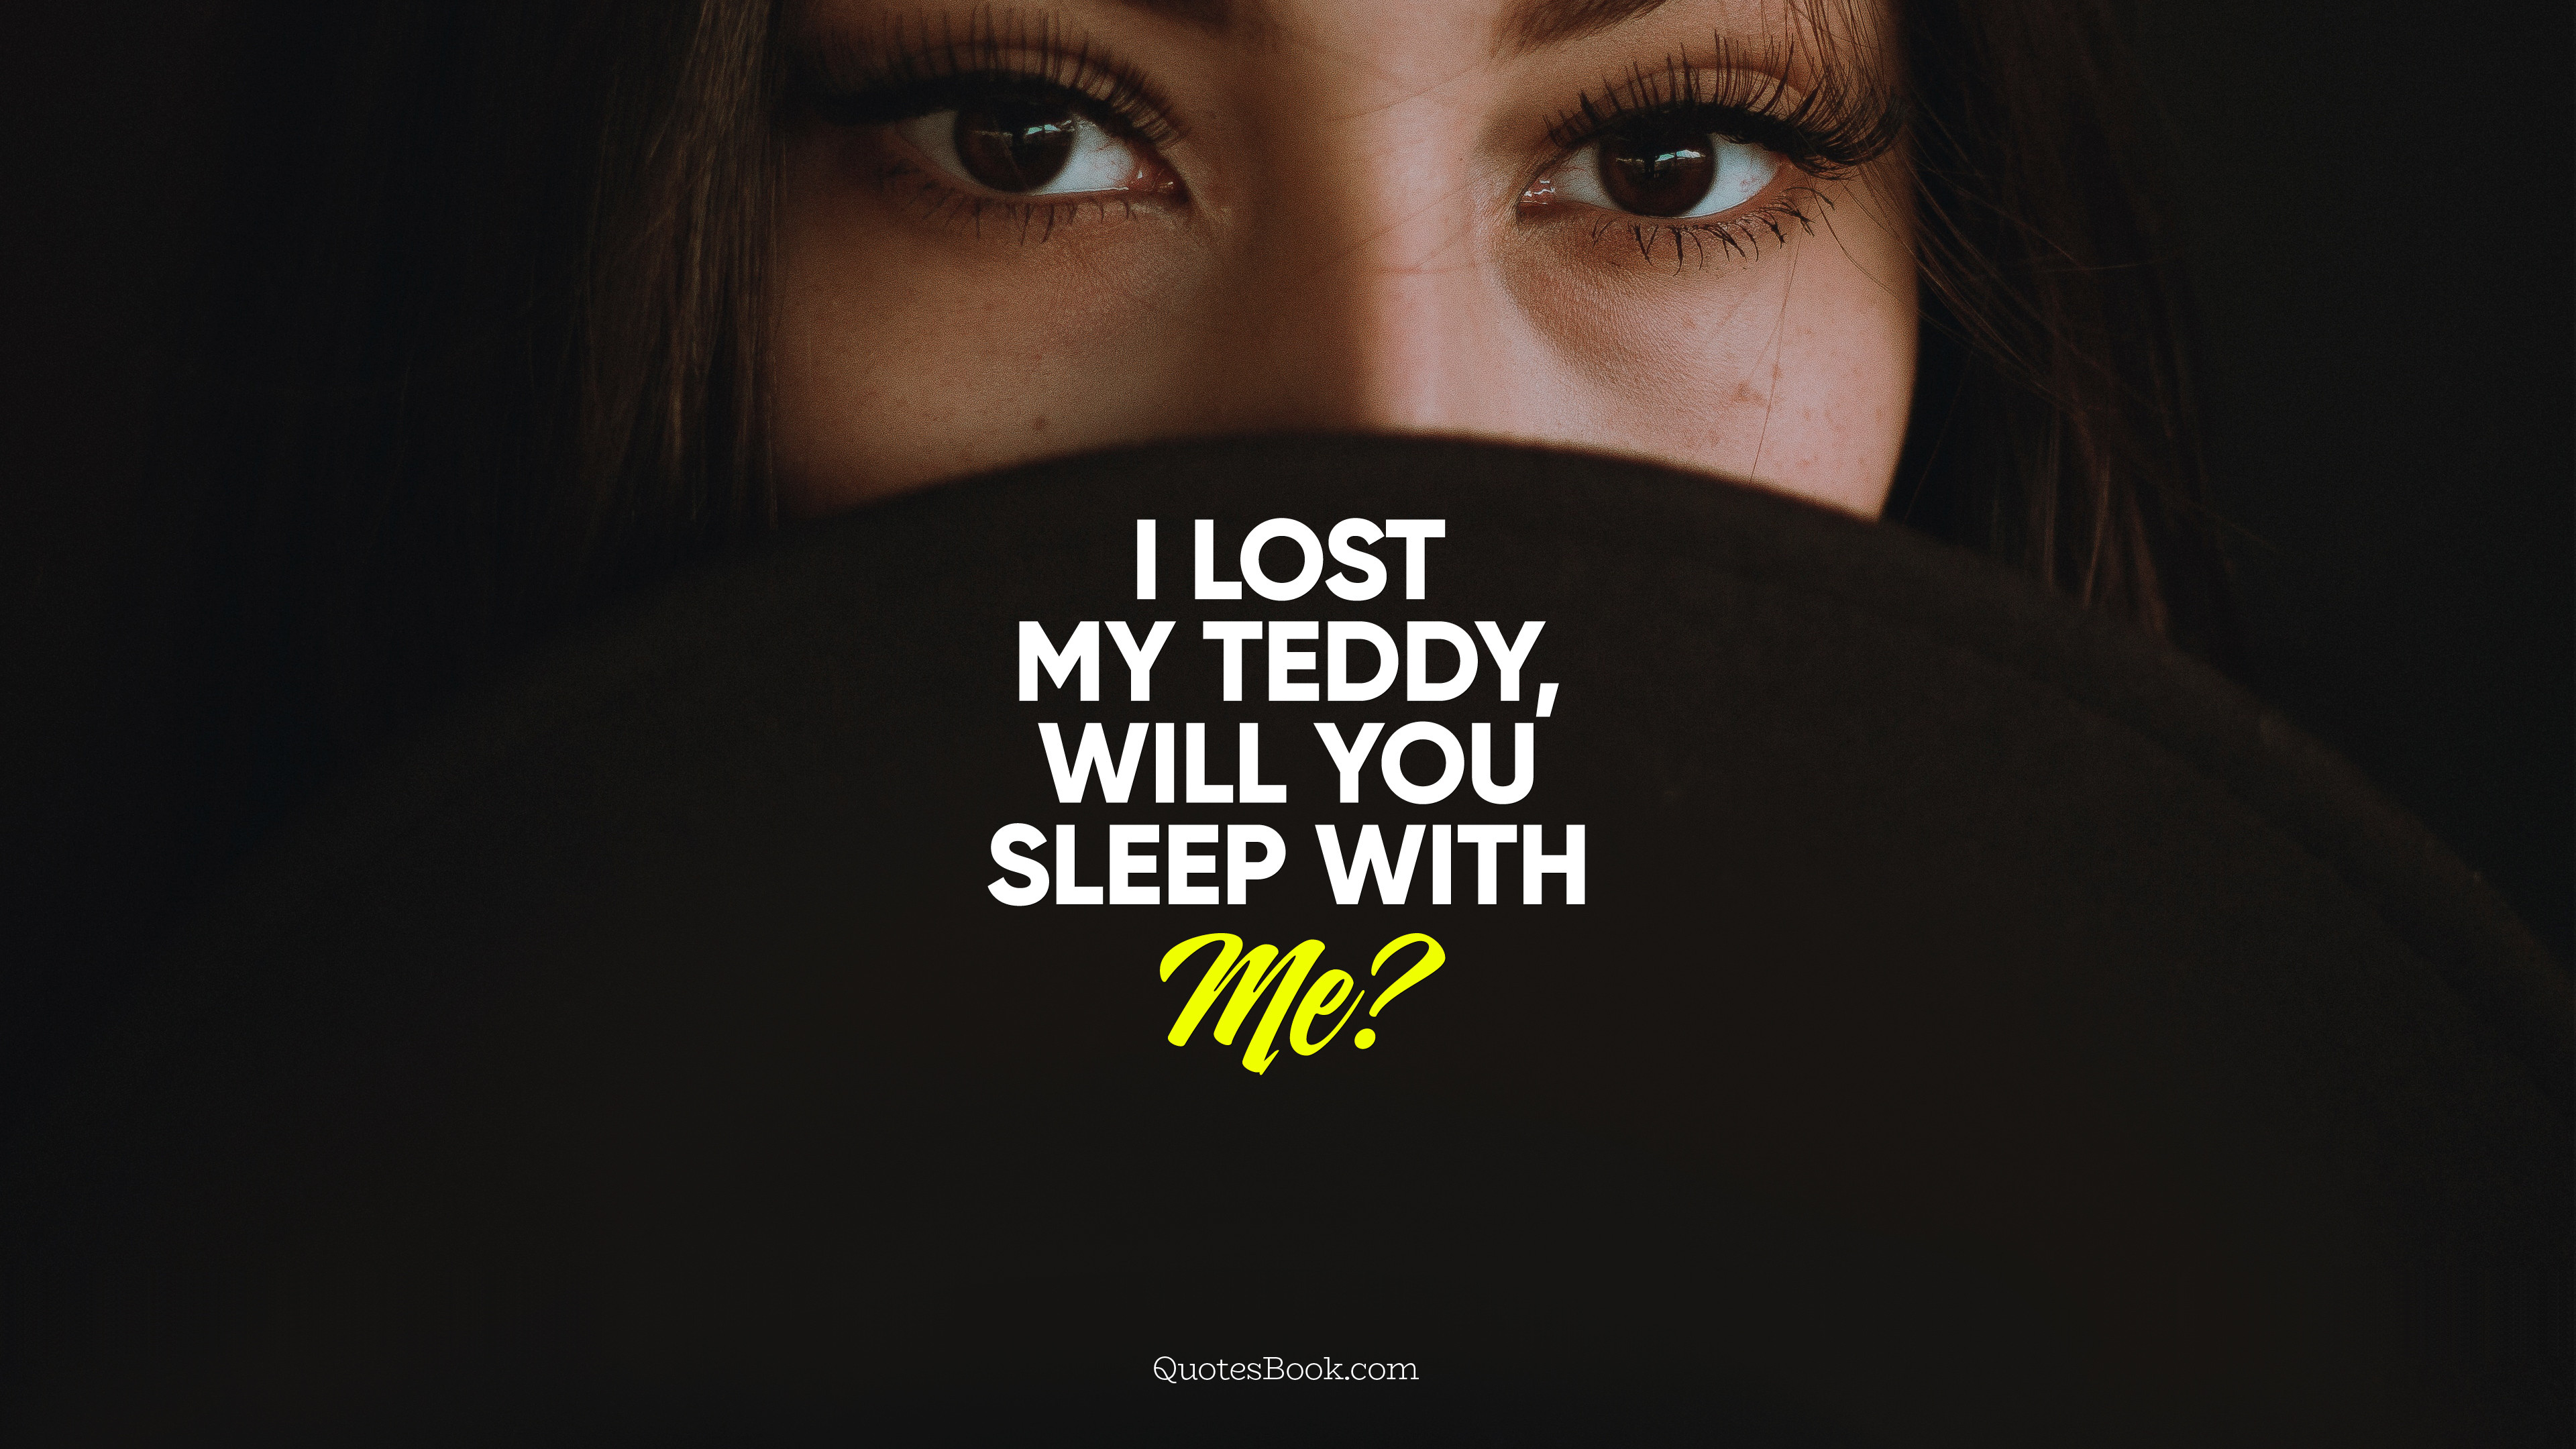 I lost my teddy, will you sleep with me? - Page 2 - QuotesBook